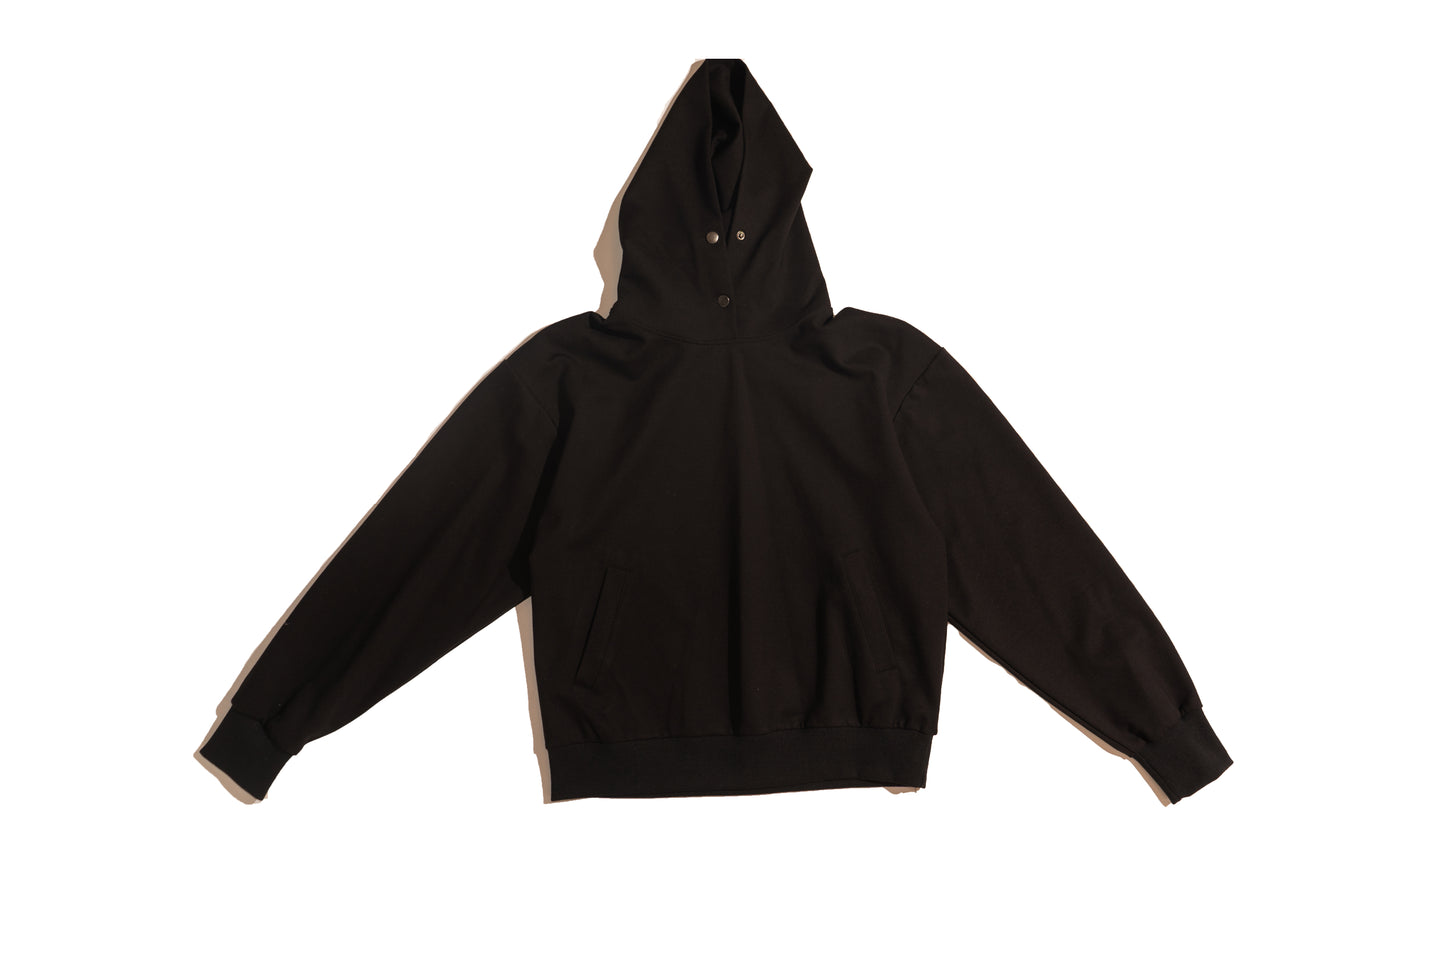 The Coifed Hoodie